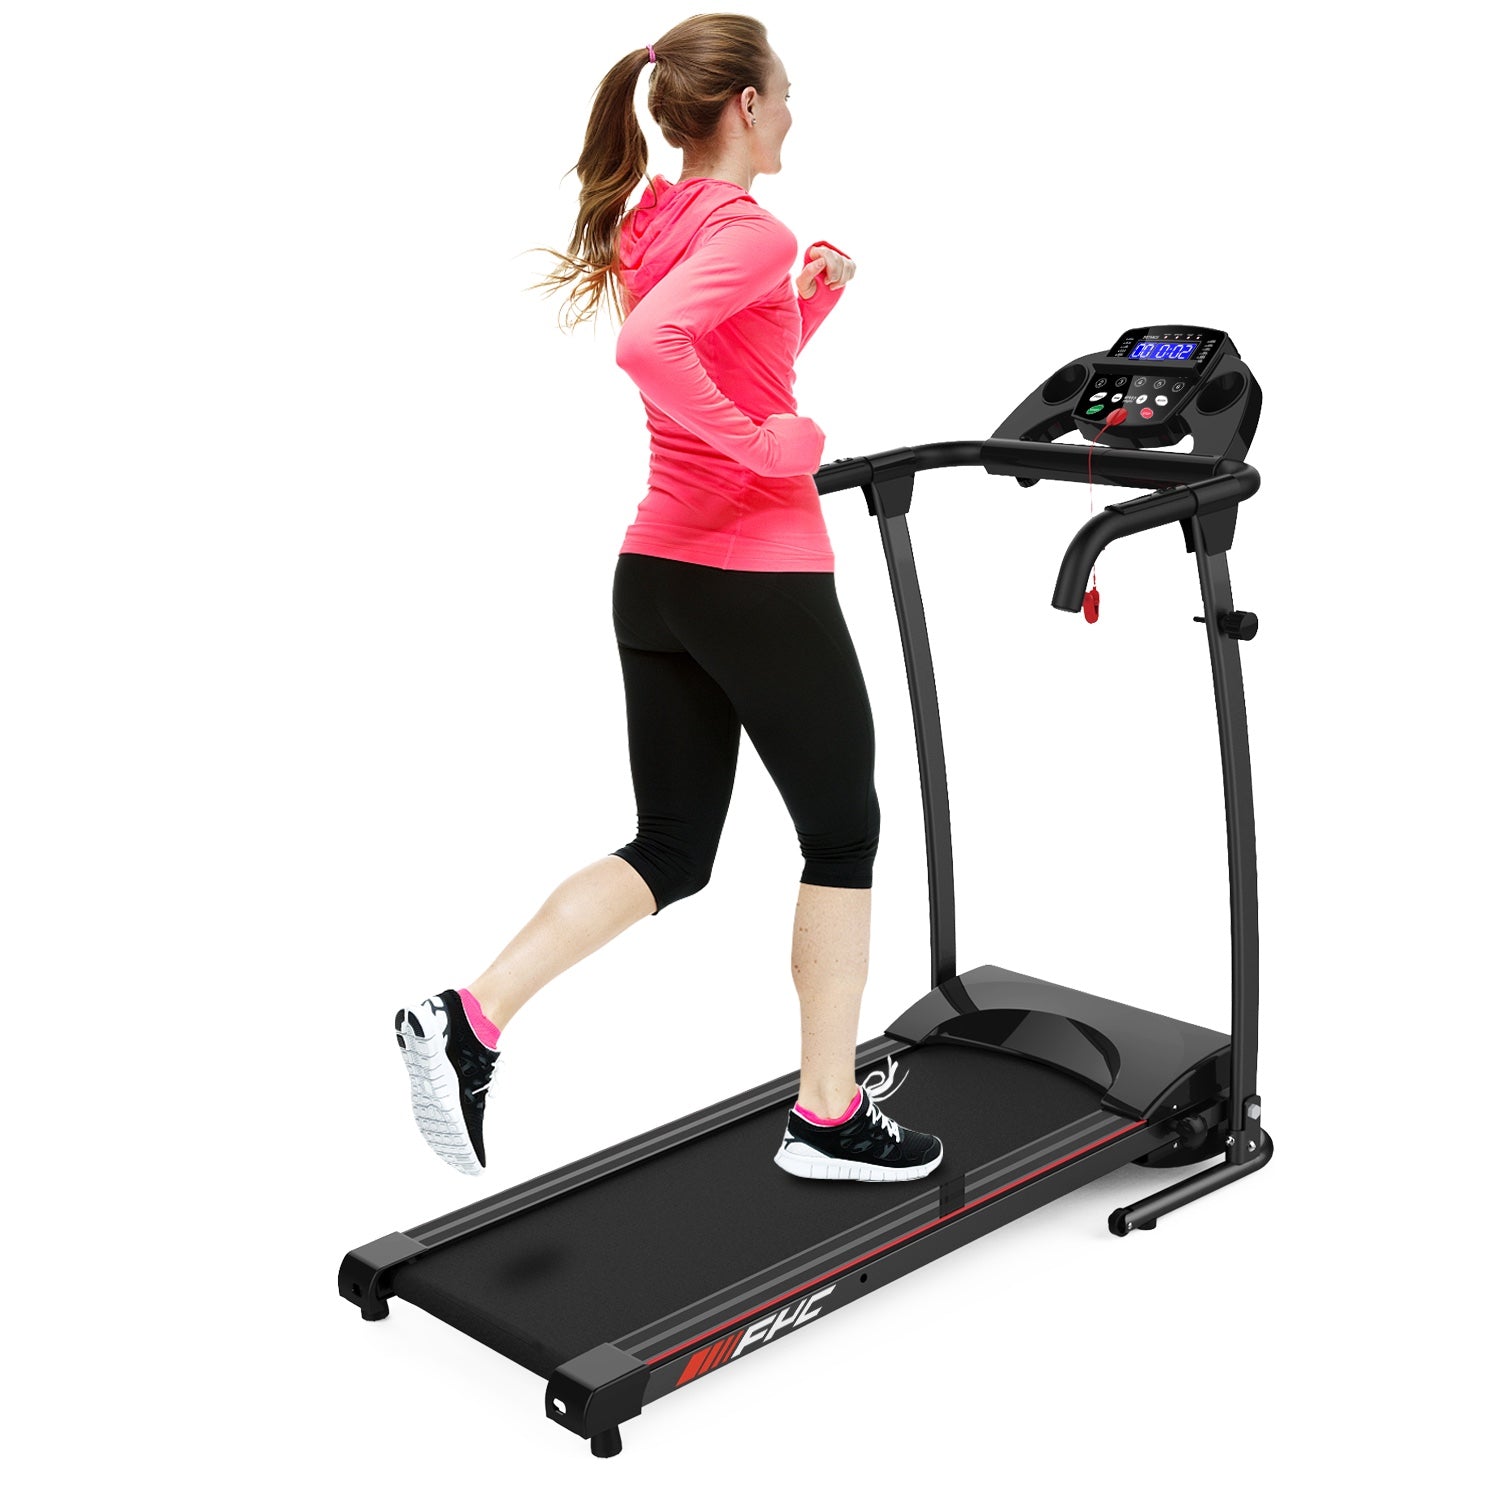 Home Folding Treadmill - Portable Electric Running Exercise Machine - Electric Small Apartment Home Gym CFB - JK107